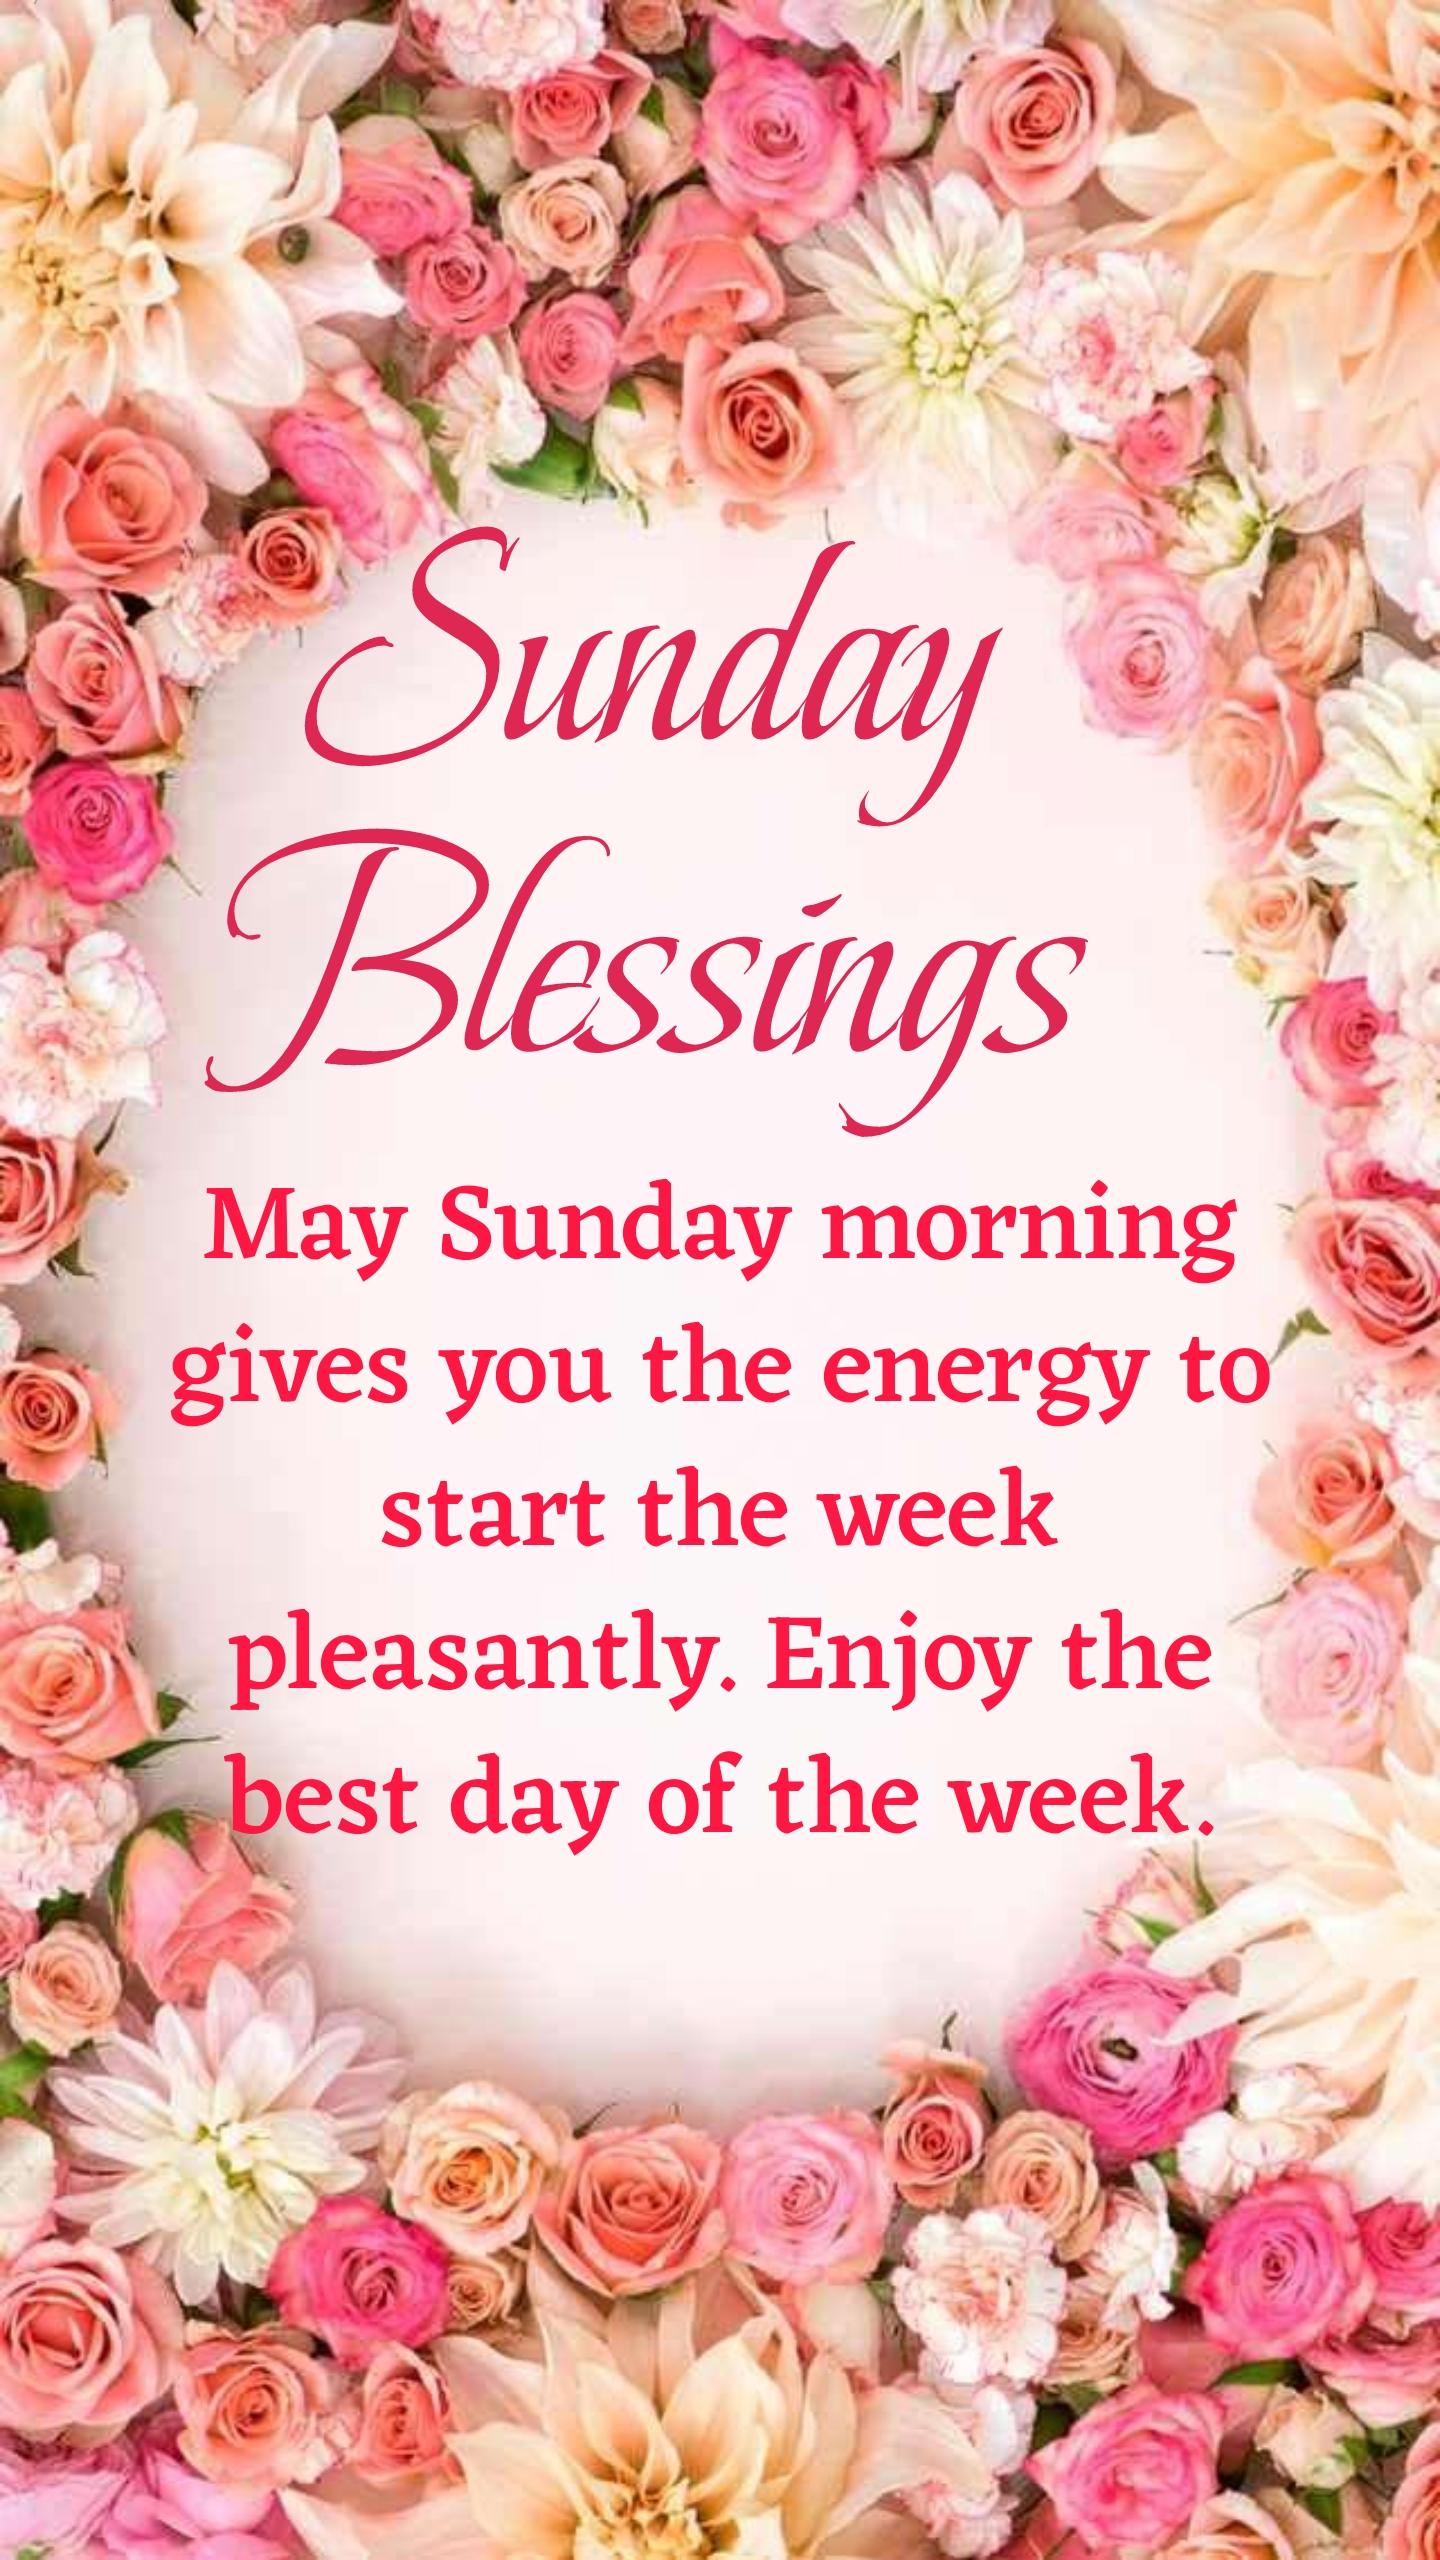 May Sunday morning gives you the energy to start the week pleasantly